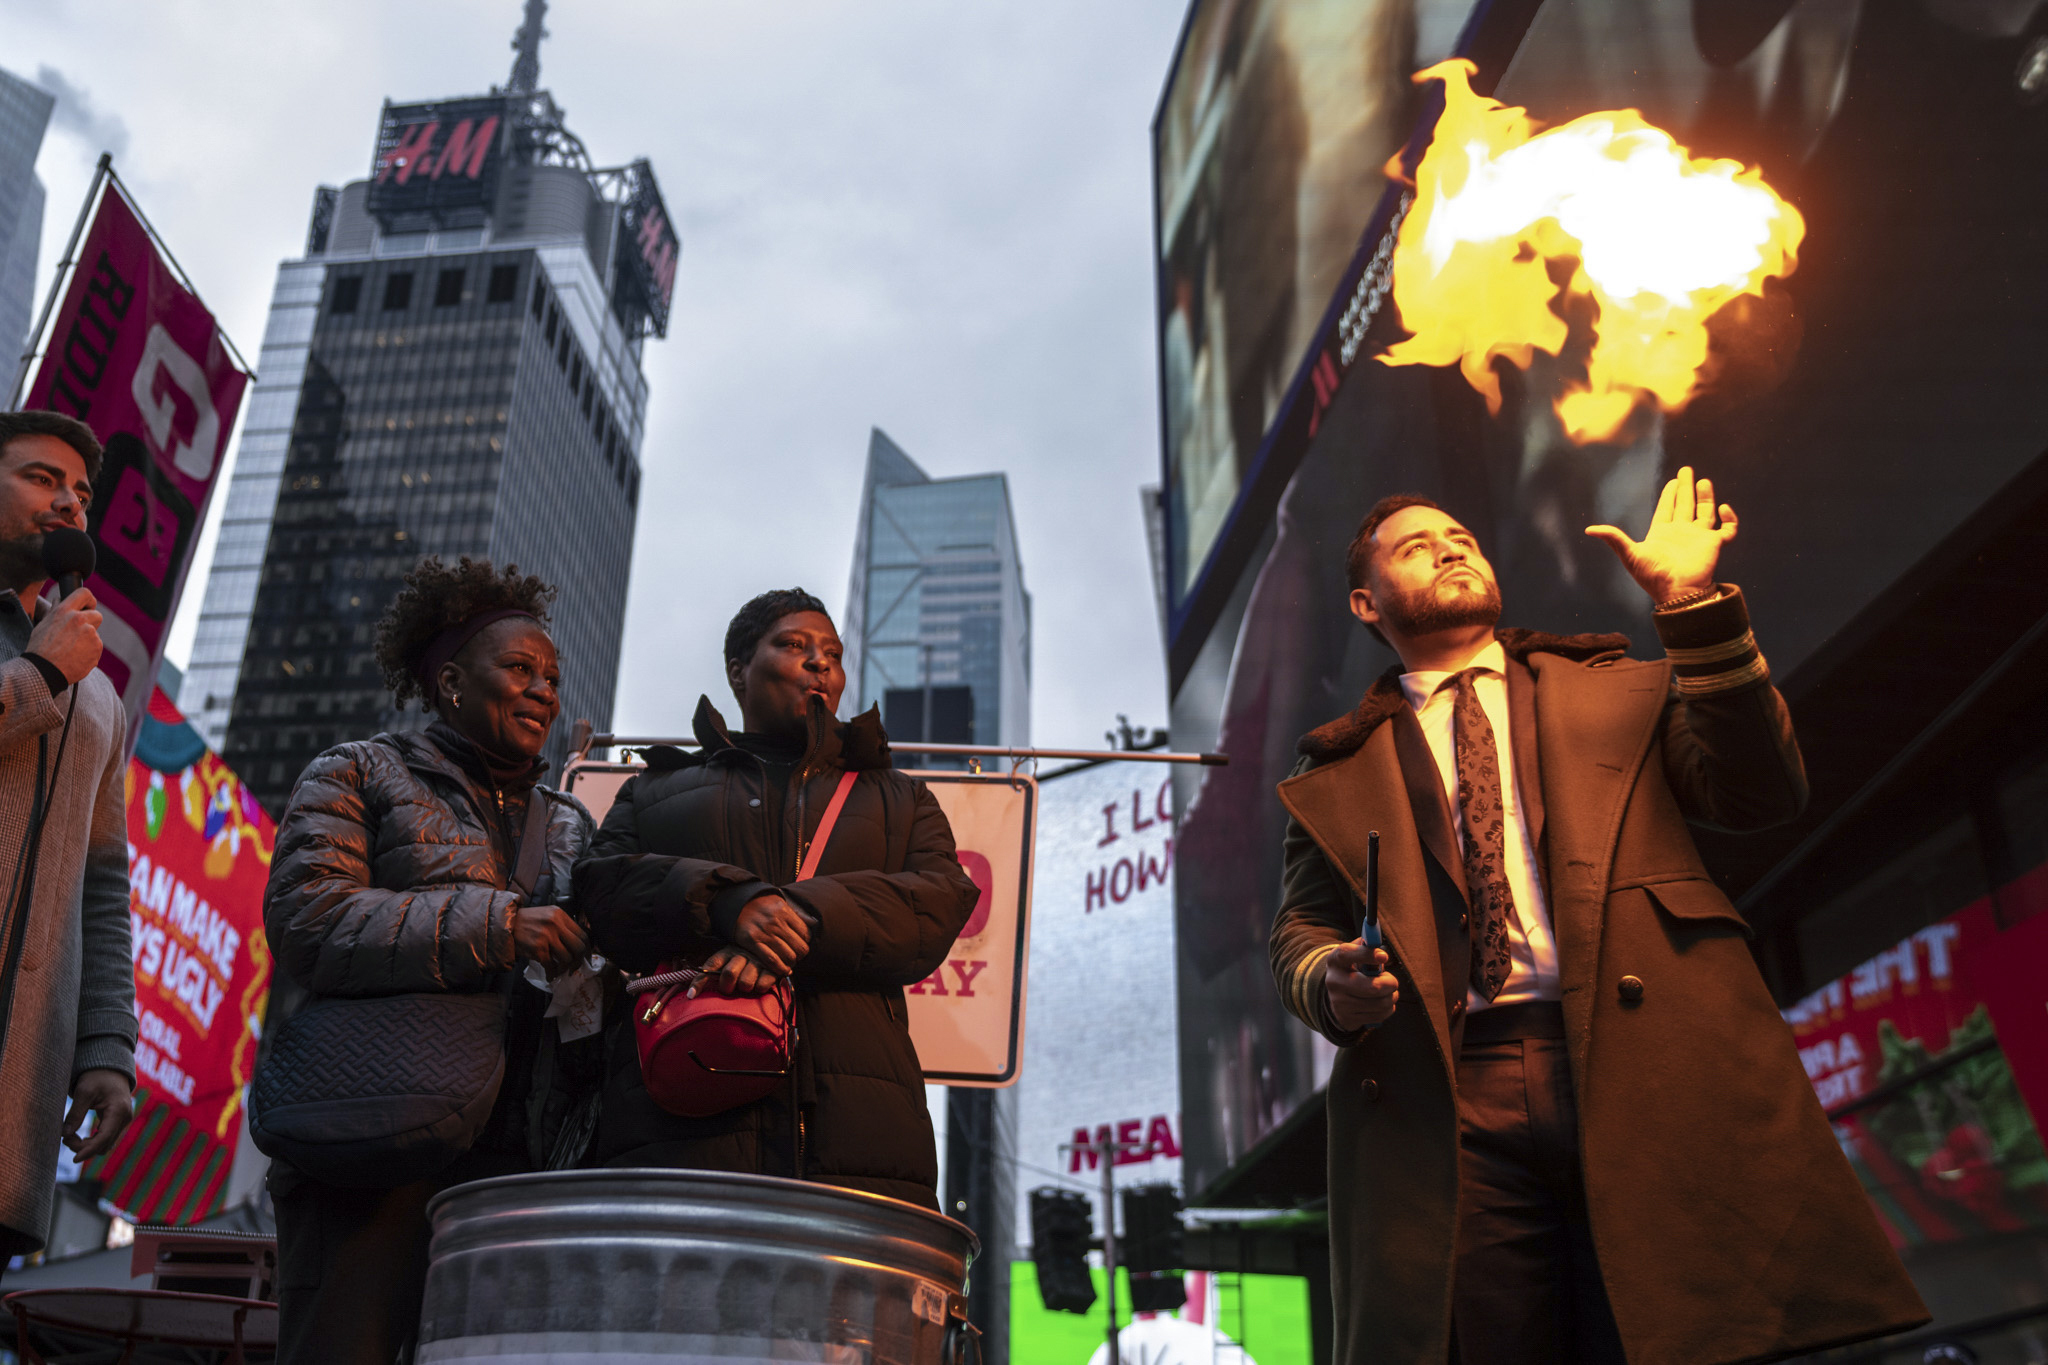 Magician Devonte Rosero, right, burns notes written by people in Times Square in New York, Thursday...